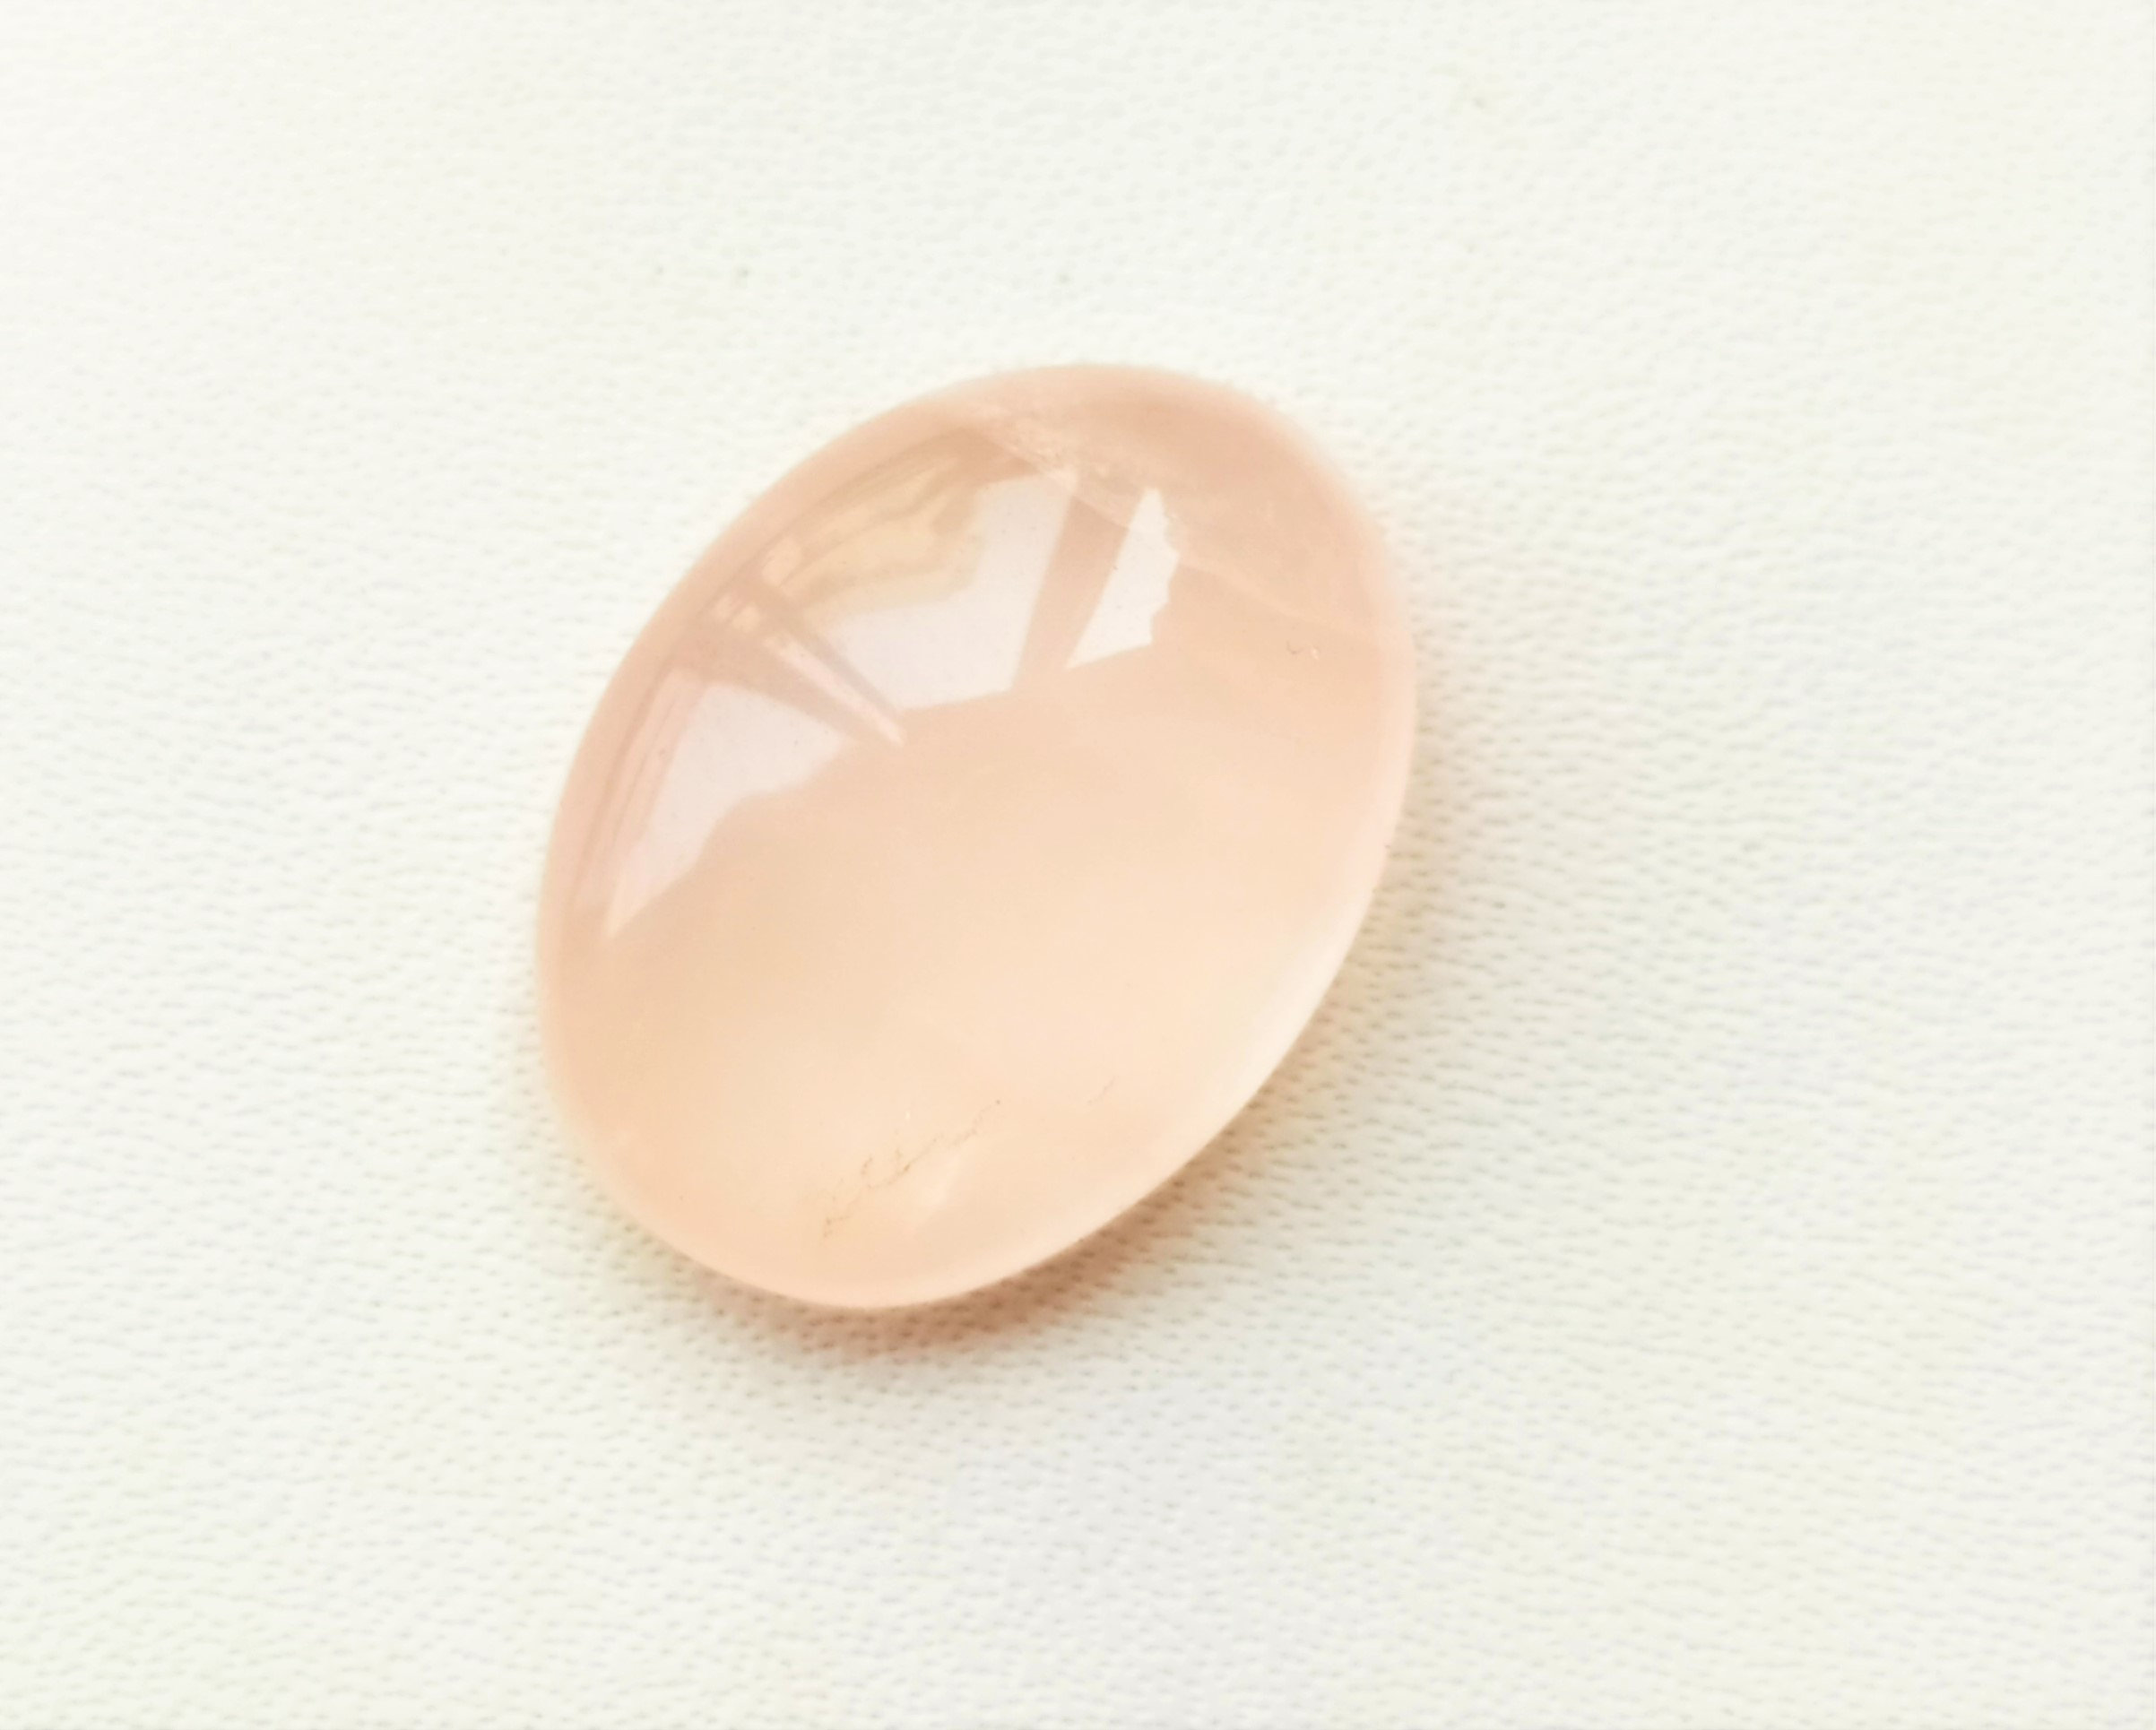 Natural rose quartz oval shape for jewelry cabochons stone | Etsy